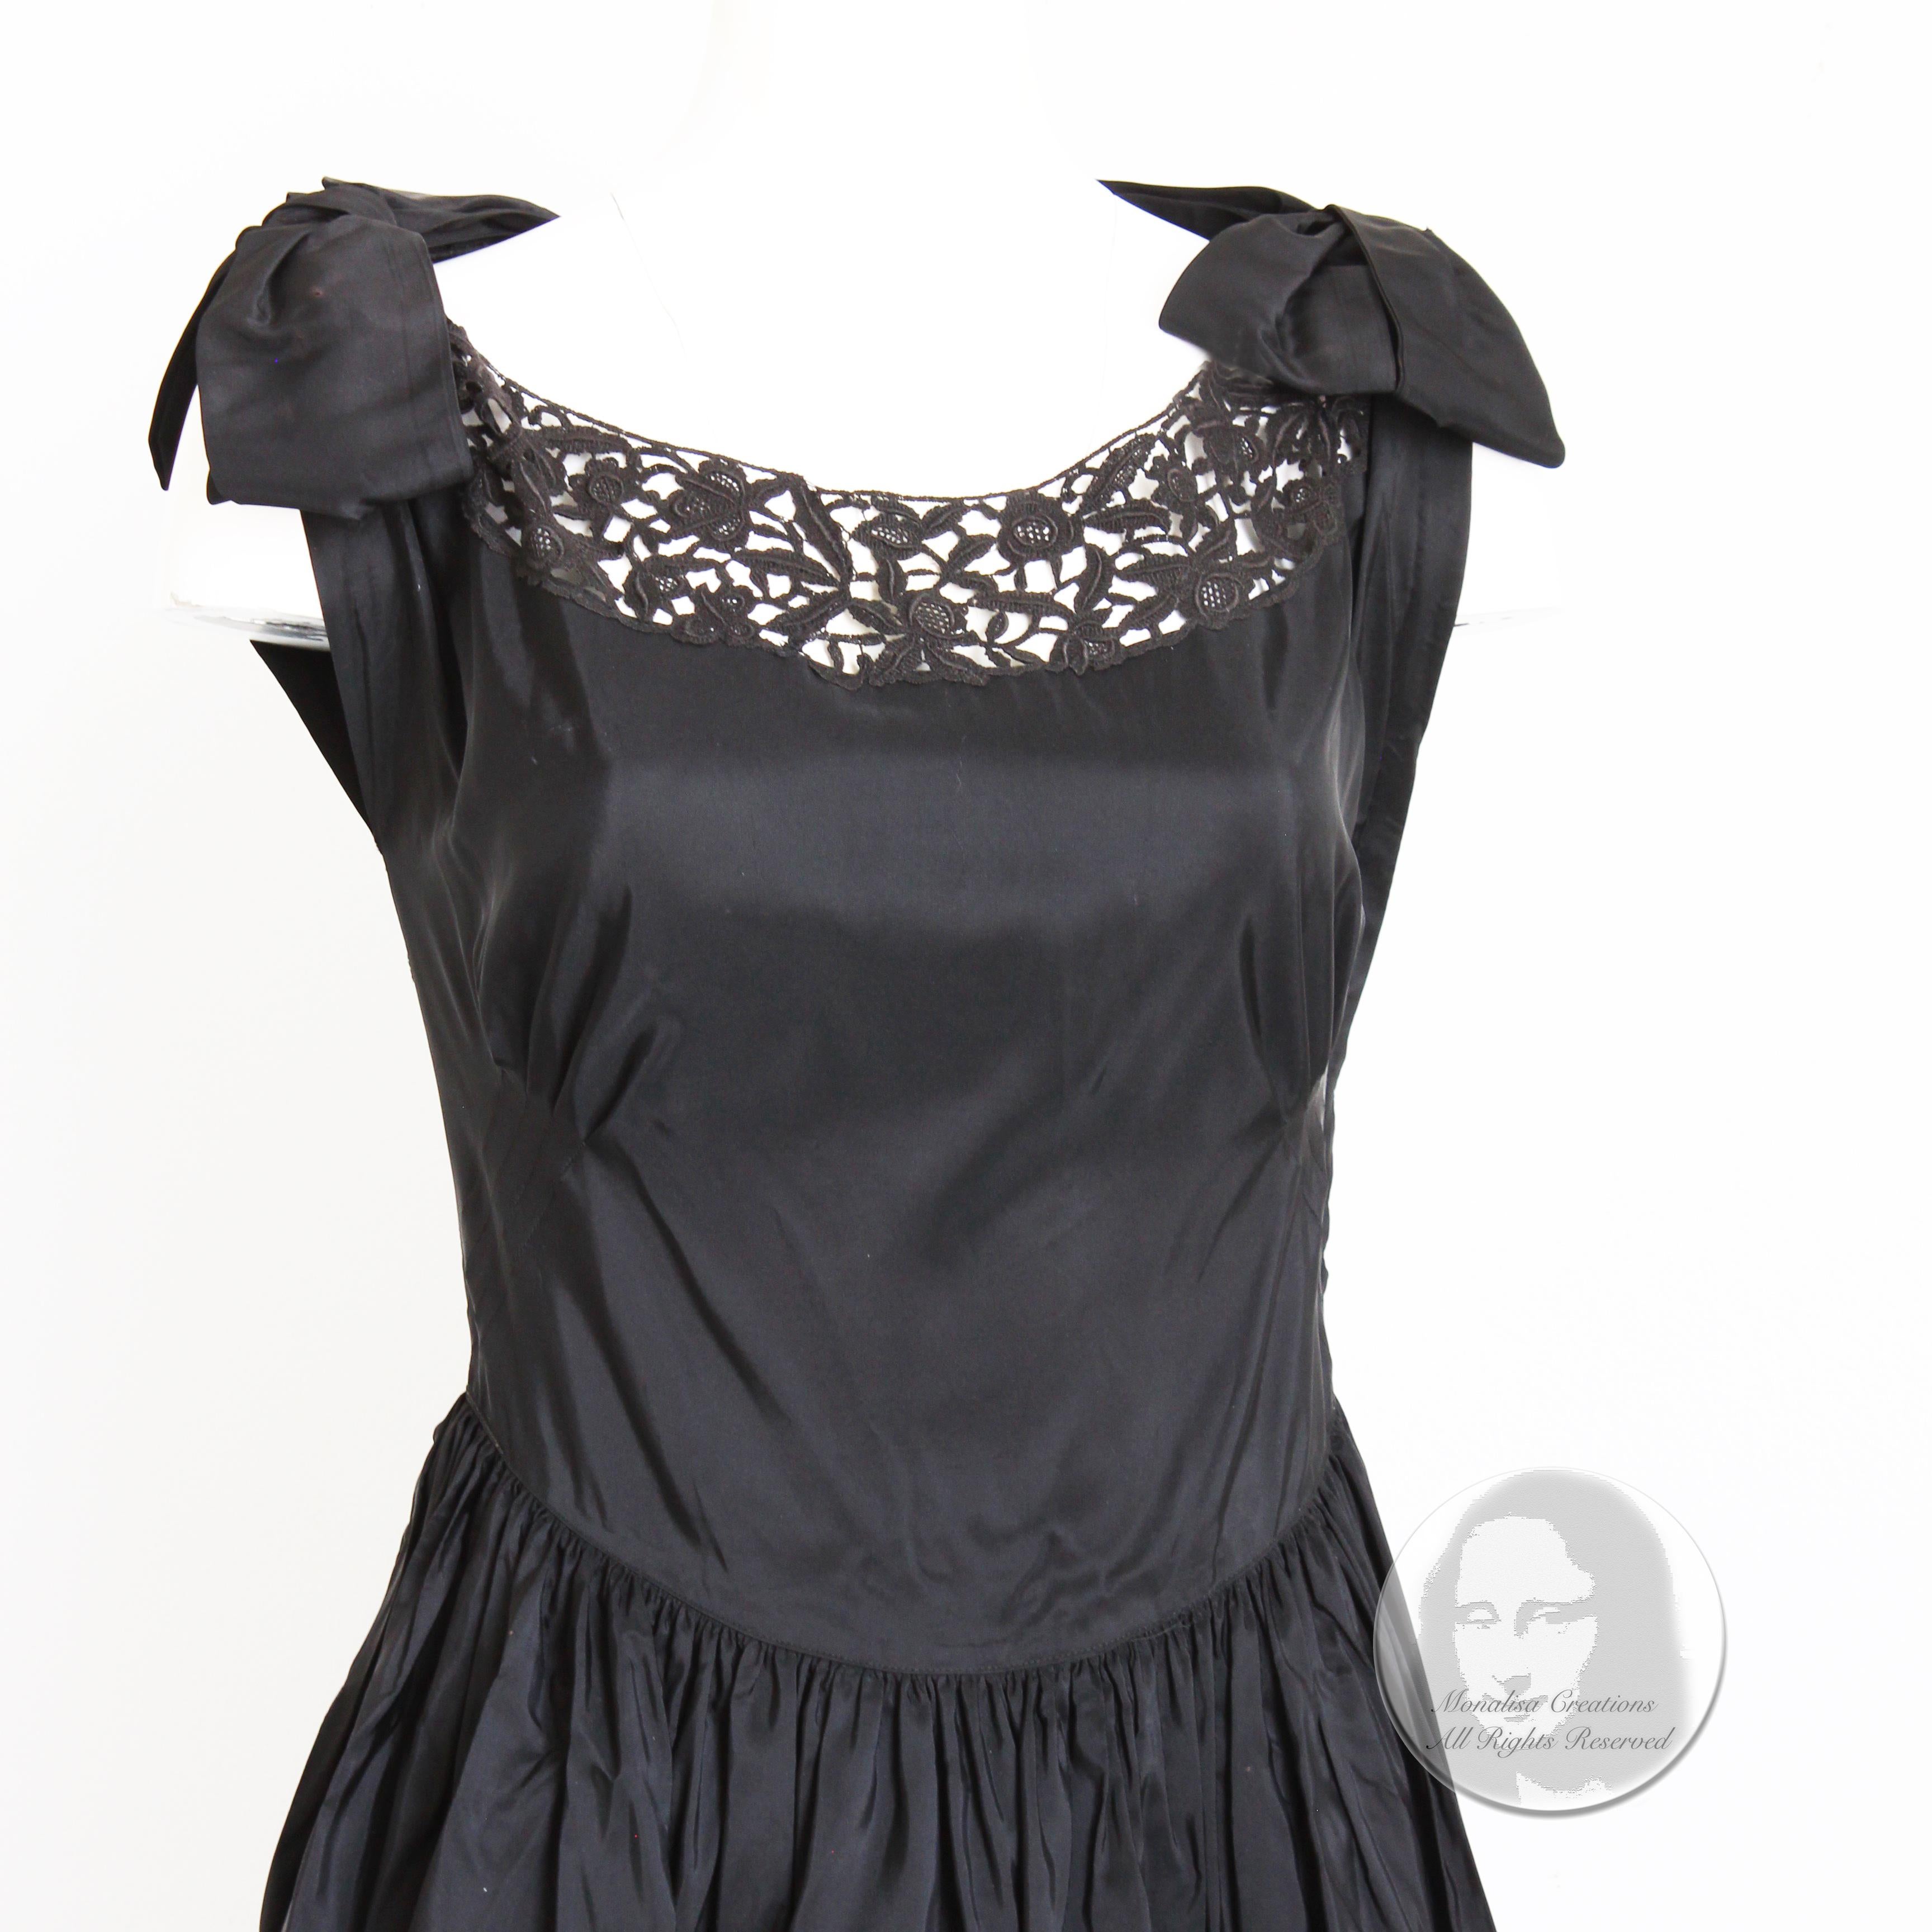 Fabulous vintage evening dress or gown, likely made in the late 40s or early 50s. Made from black taffeta, it features a black scalloped lace hem with lace inserts at the chest and back - so chic! It's got darts at the bodice , a gathered dropped